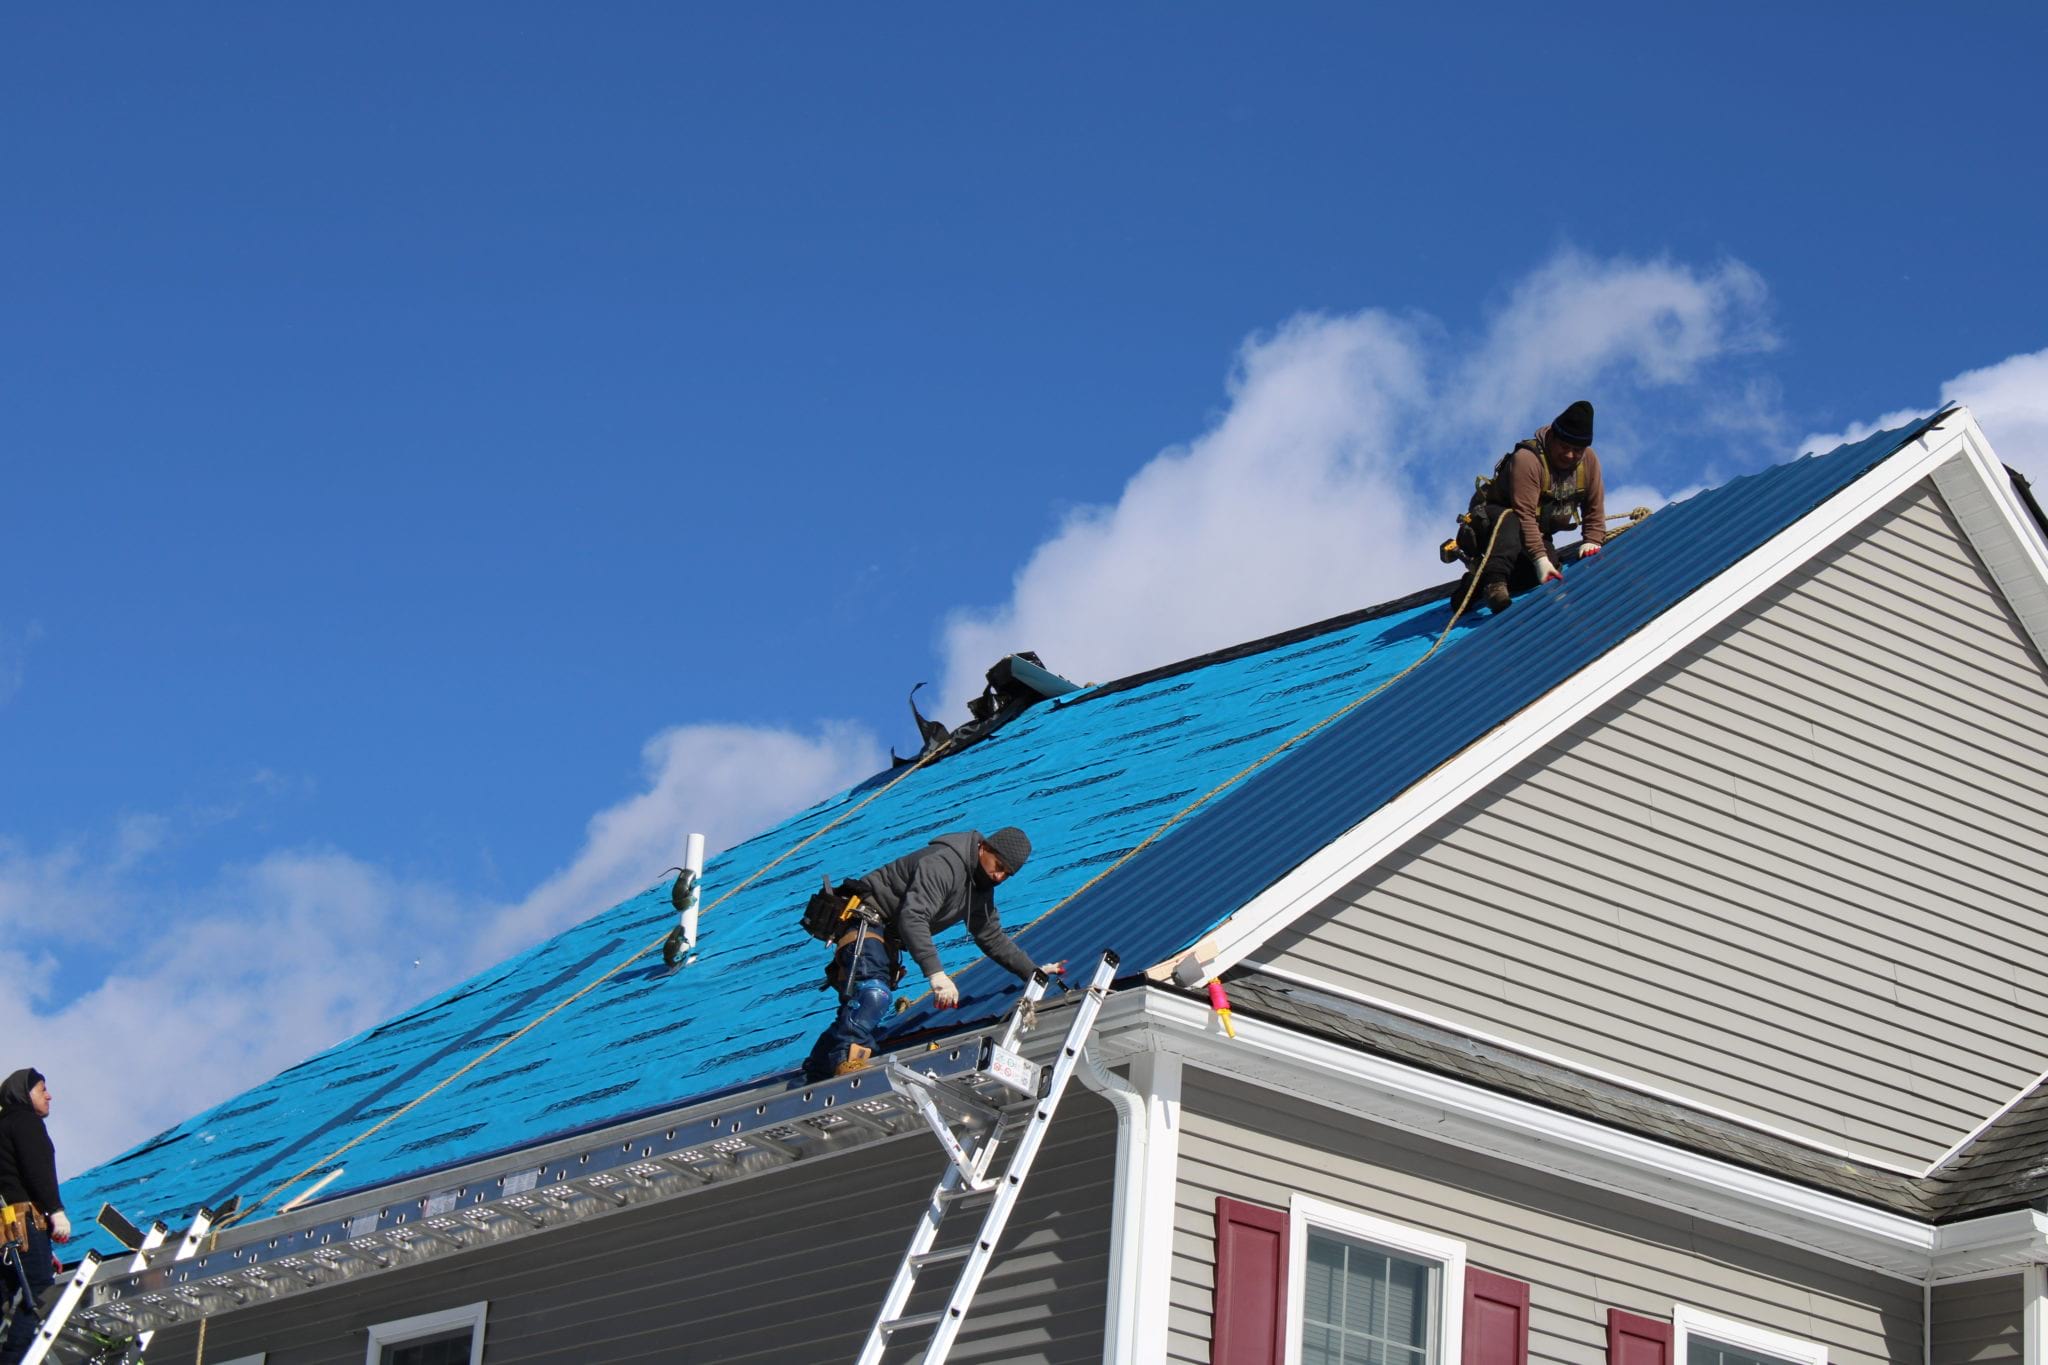 3 workers applying metal panels to a roof.